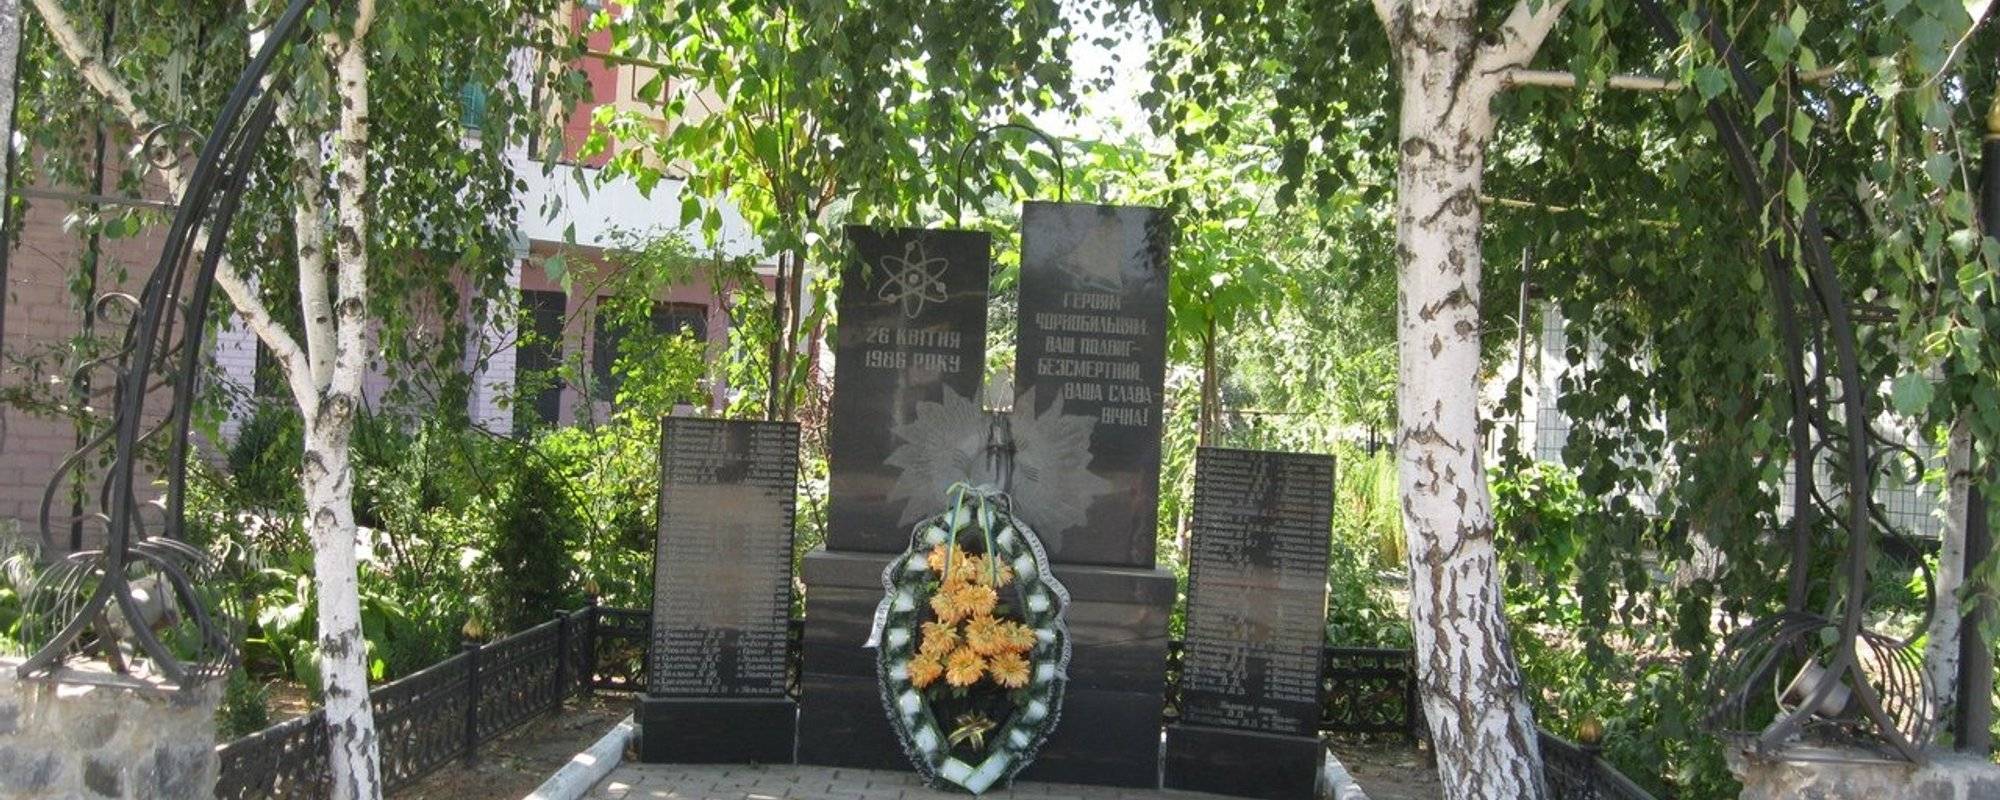 Monument to Chernobyl victims in Balta